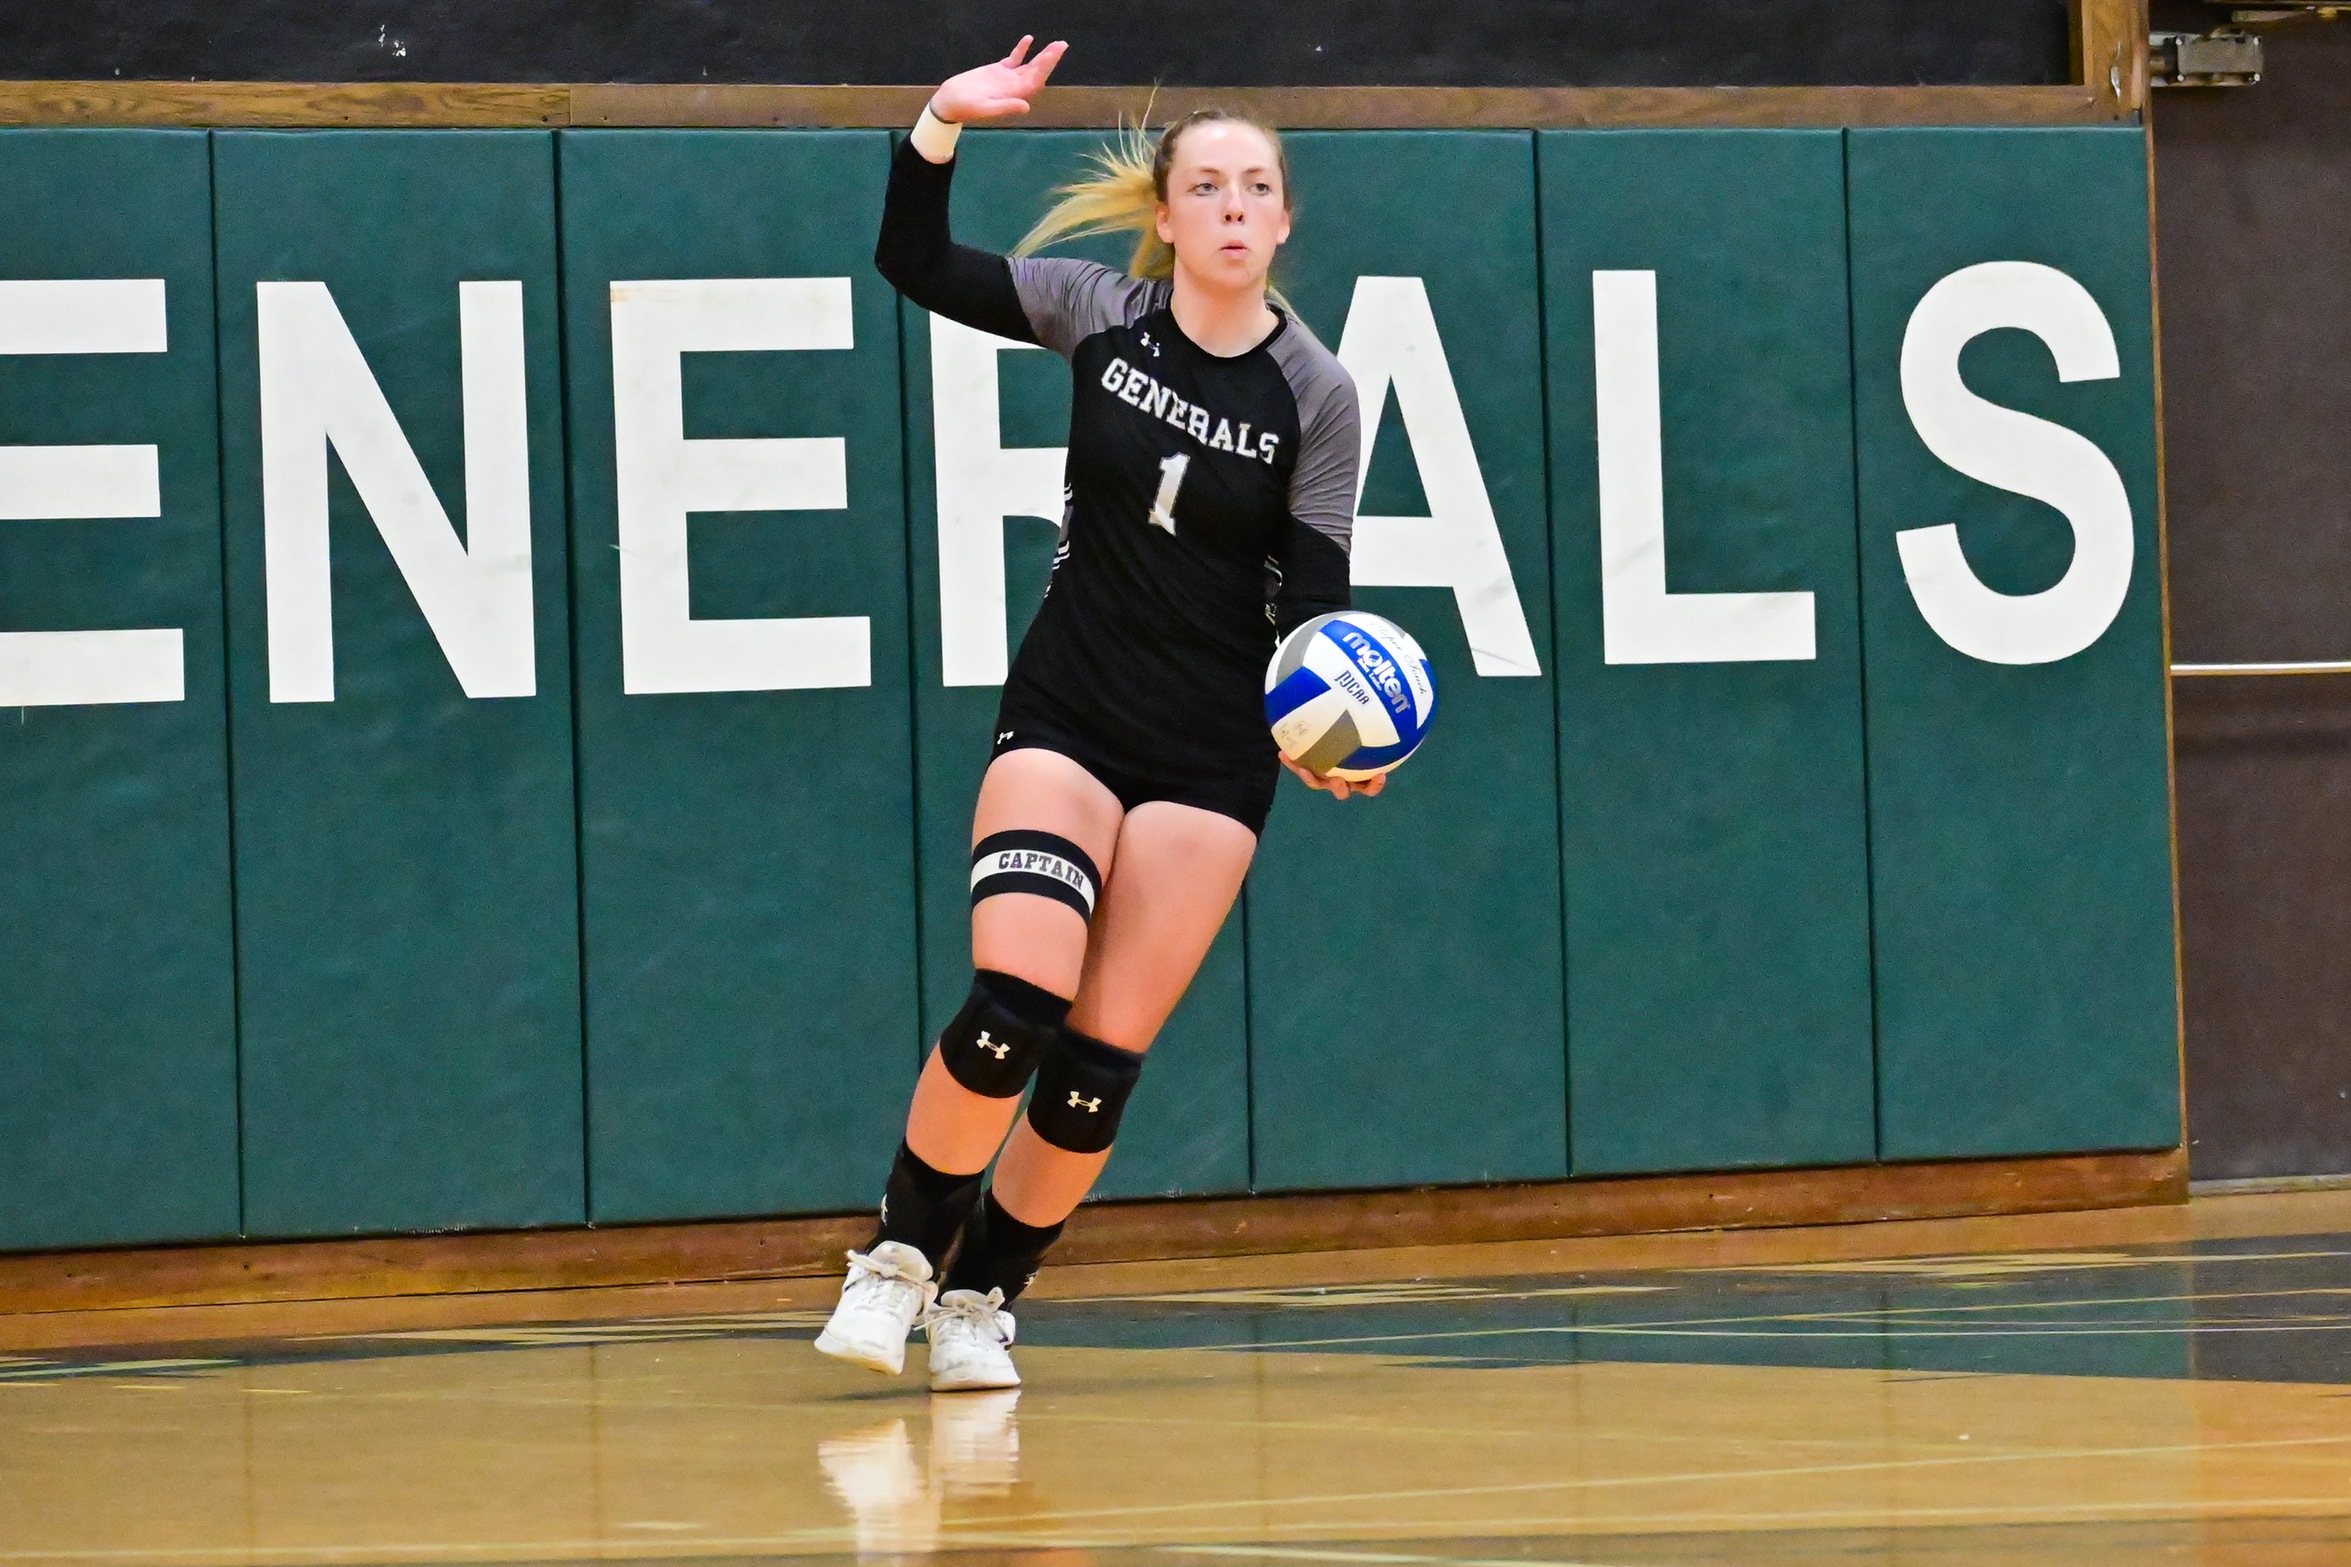 Generals Fall to Hudson Valley in First Conference Match of the Year